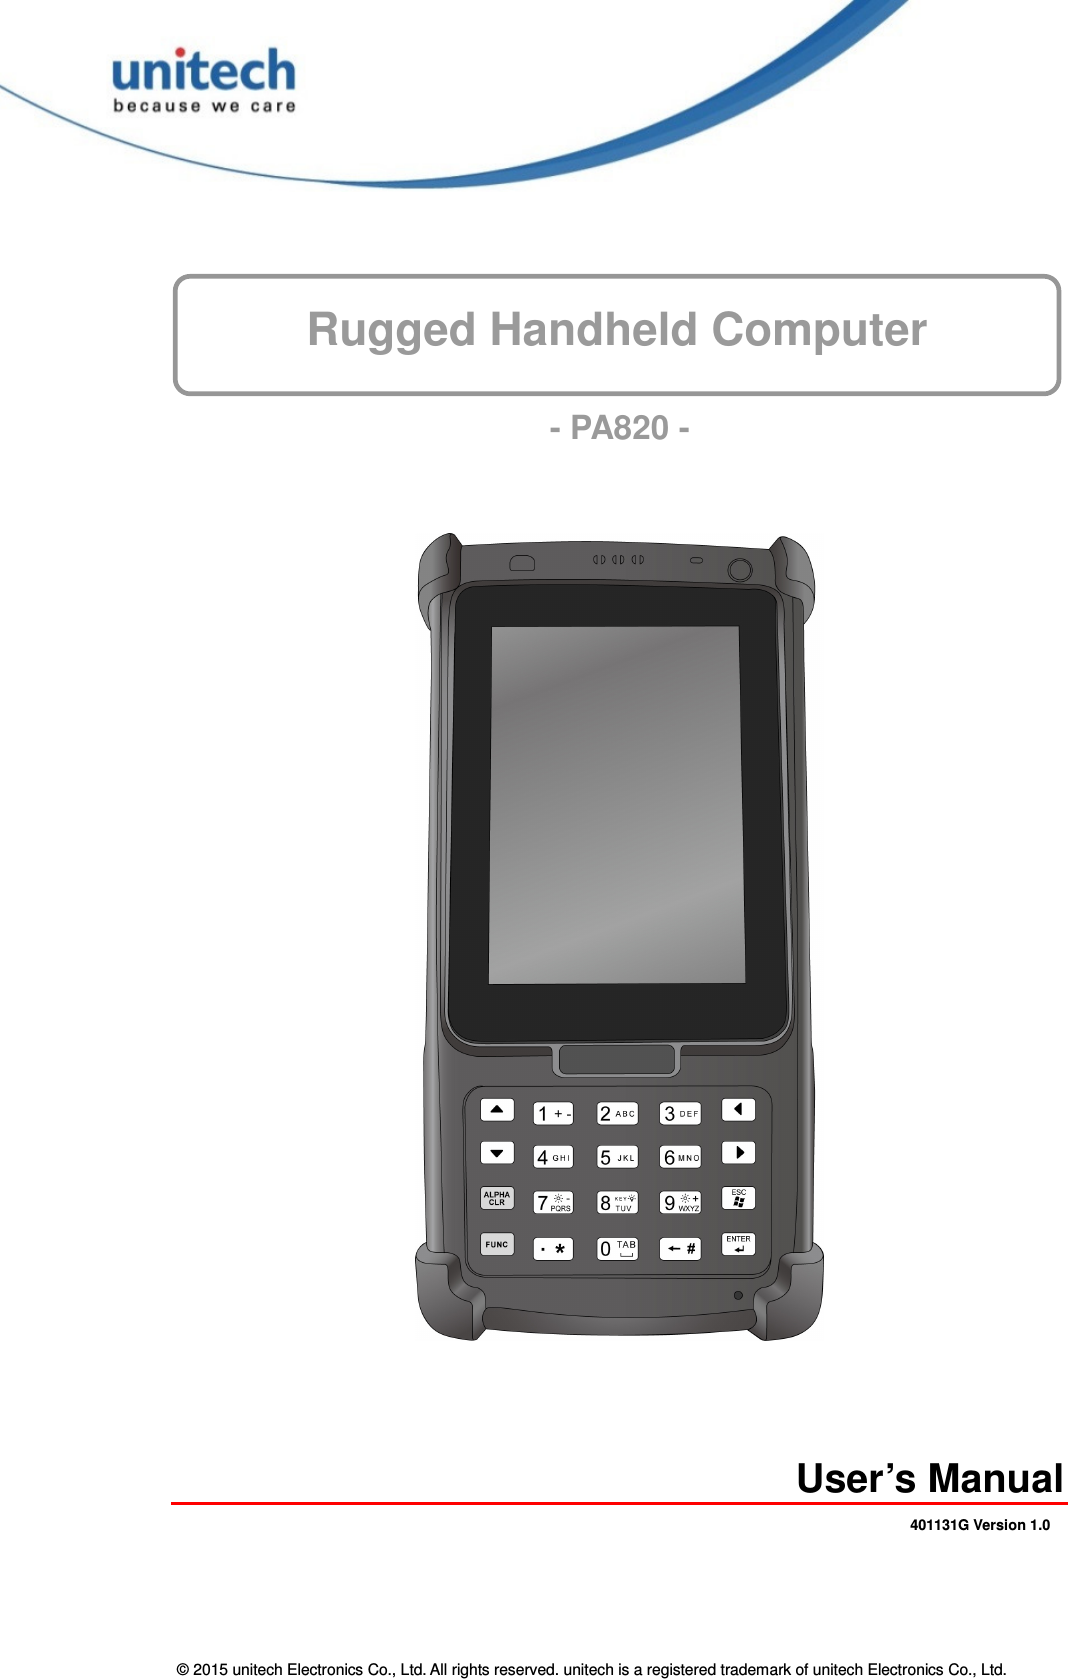  © 2015 unitech Electronics Co., Ltd. All rights reserved. unitech is a registered trademark of unitech Electronics Co., Ltd. Rugged Handheld Computer       - PA820 -         User’s Manual 401131G Version 1.0 